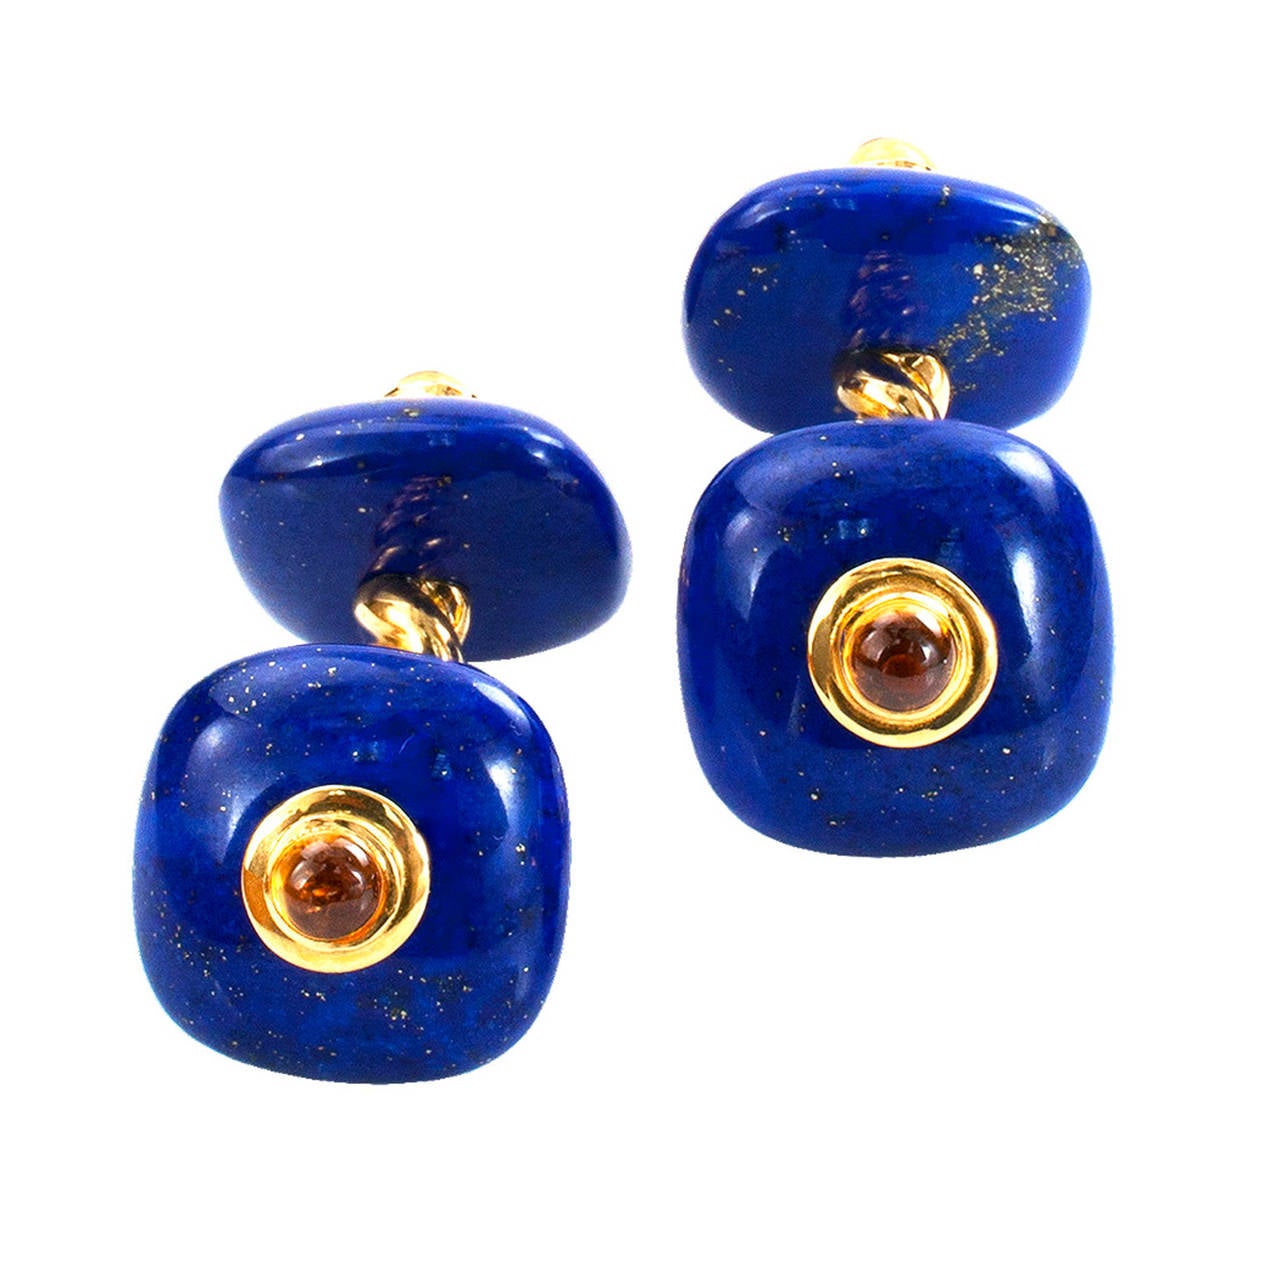 Deakin & Francis Lapis Lazuli and Cirtine Estate Cuff Links

The word sartorial certainly comes to mind with respect to these handsome and tailored cuff links.   The elegant bar bell designs feature four, very rich blue, cushion-shaped lapis